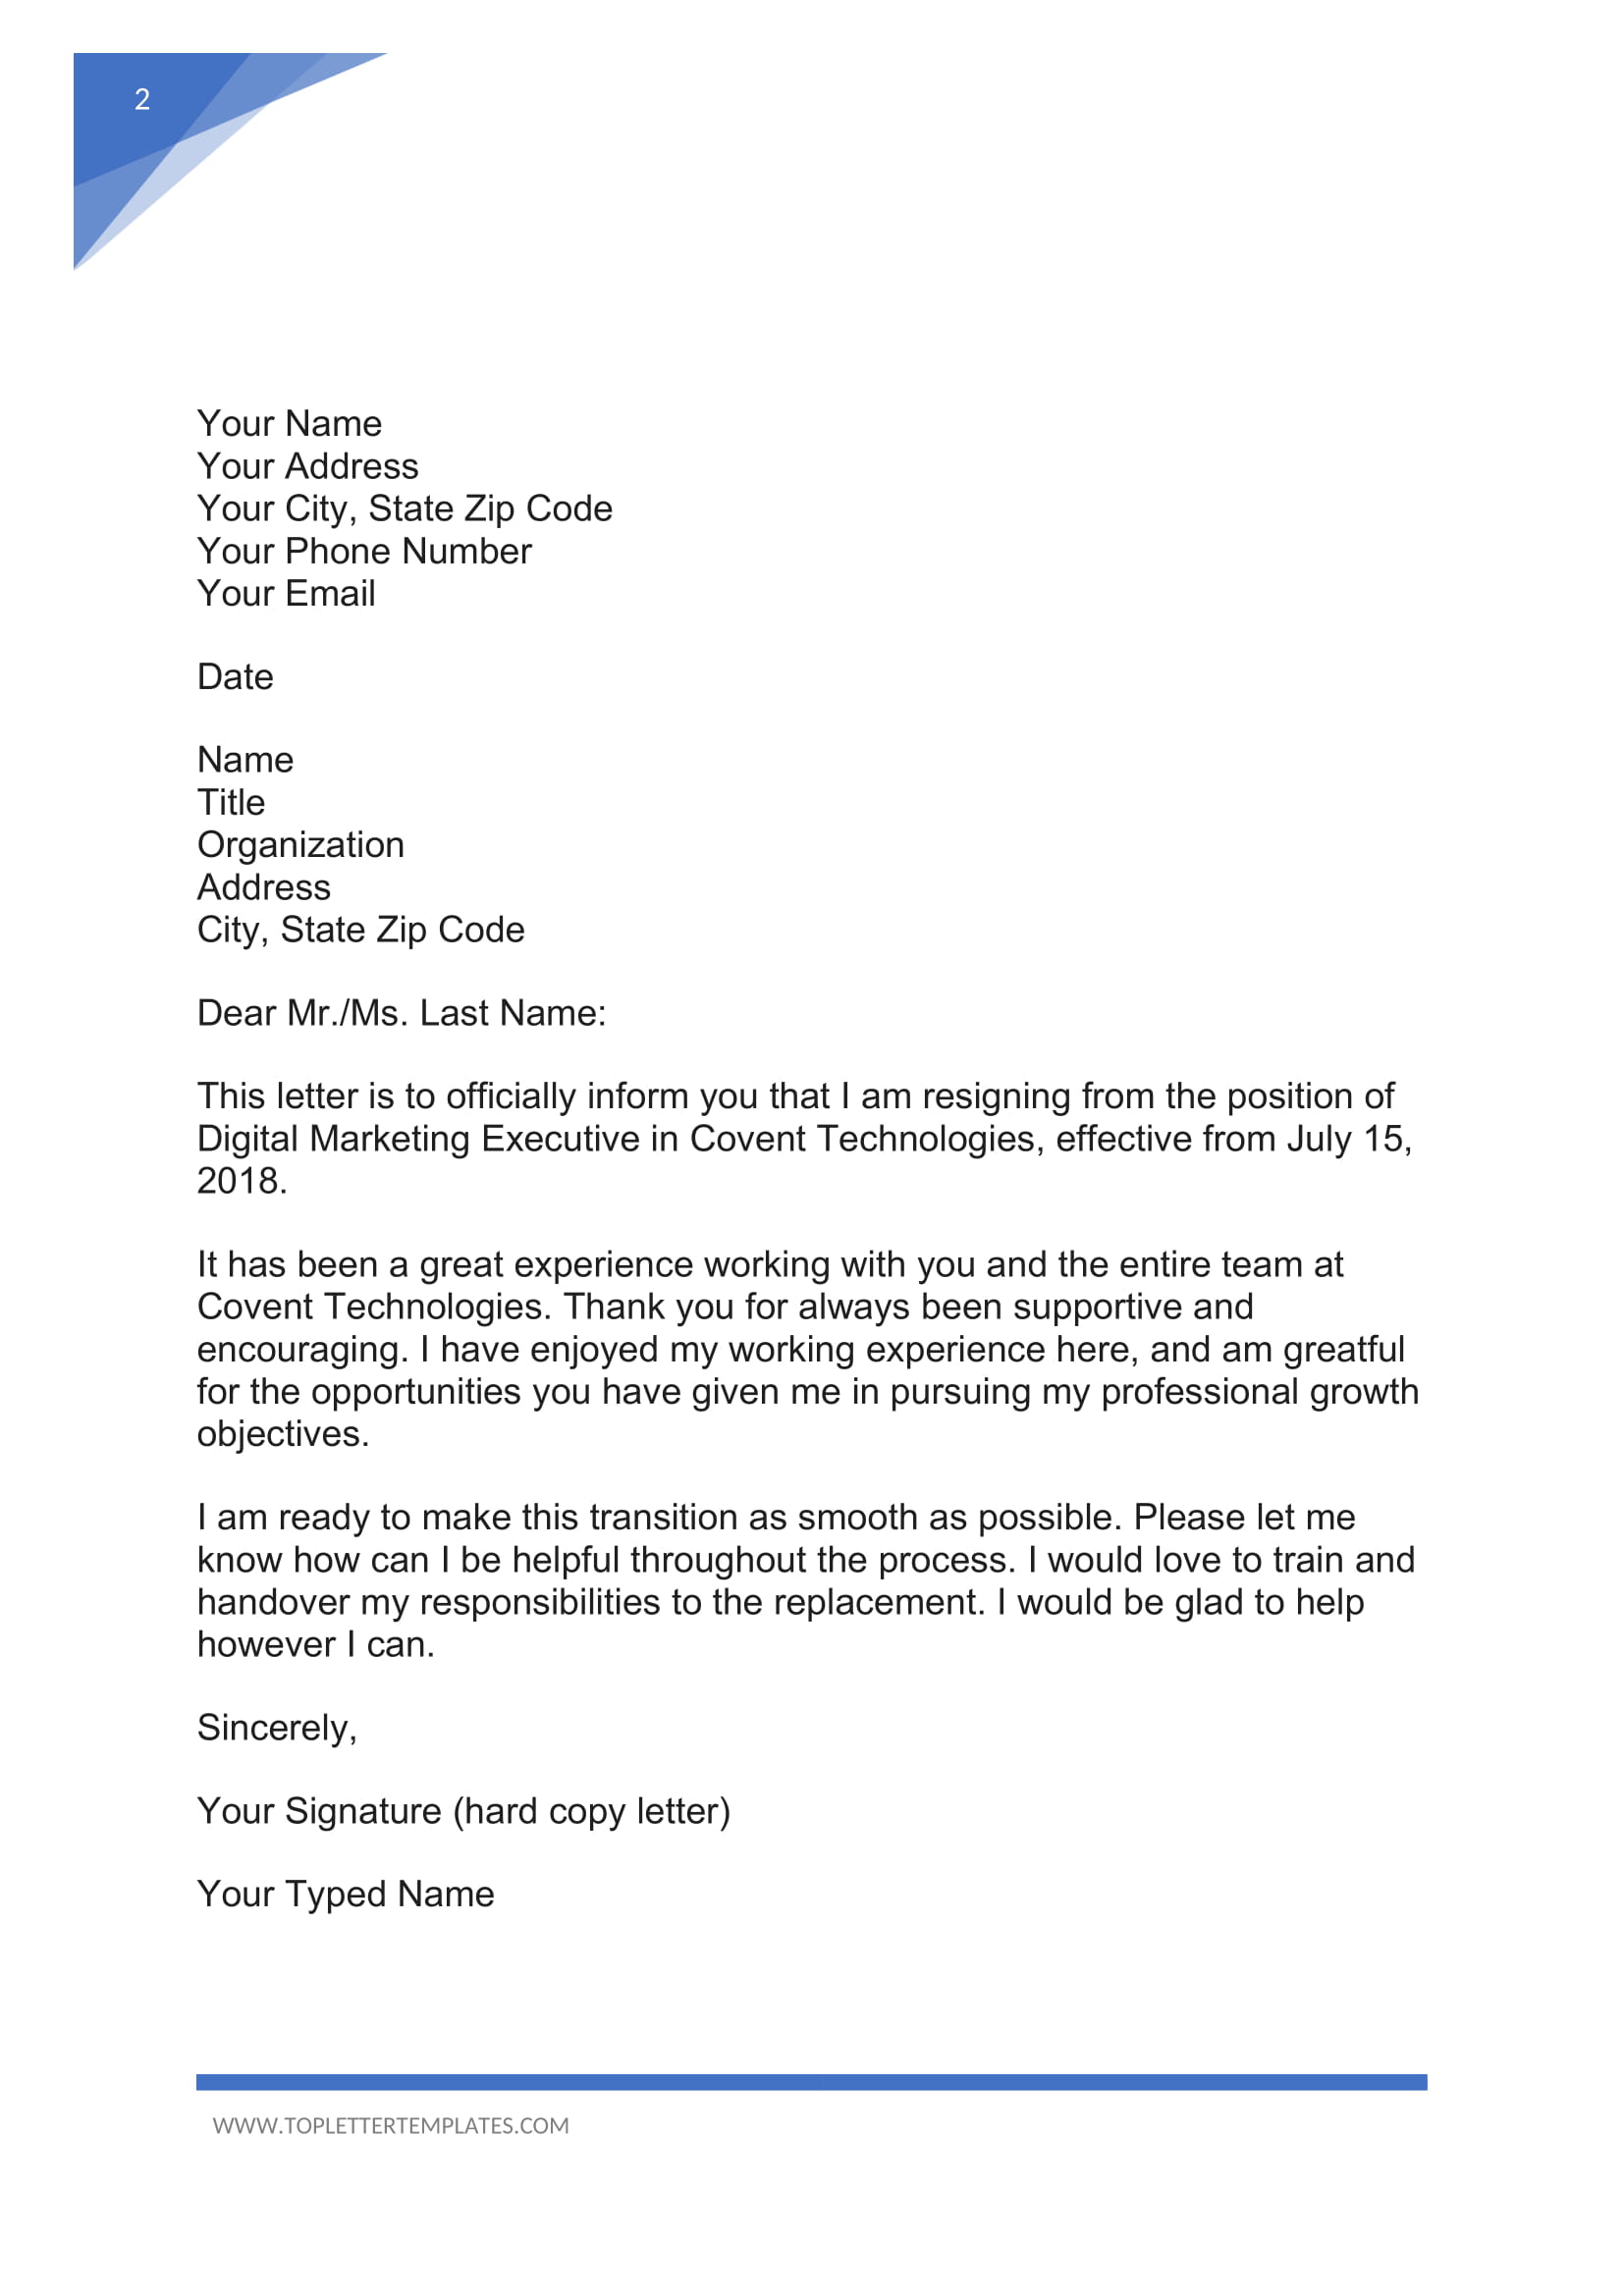 Examples Of Letter Of Resignation from toplettertemplates.com